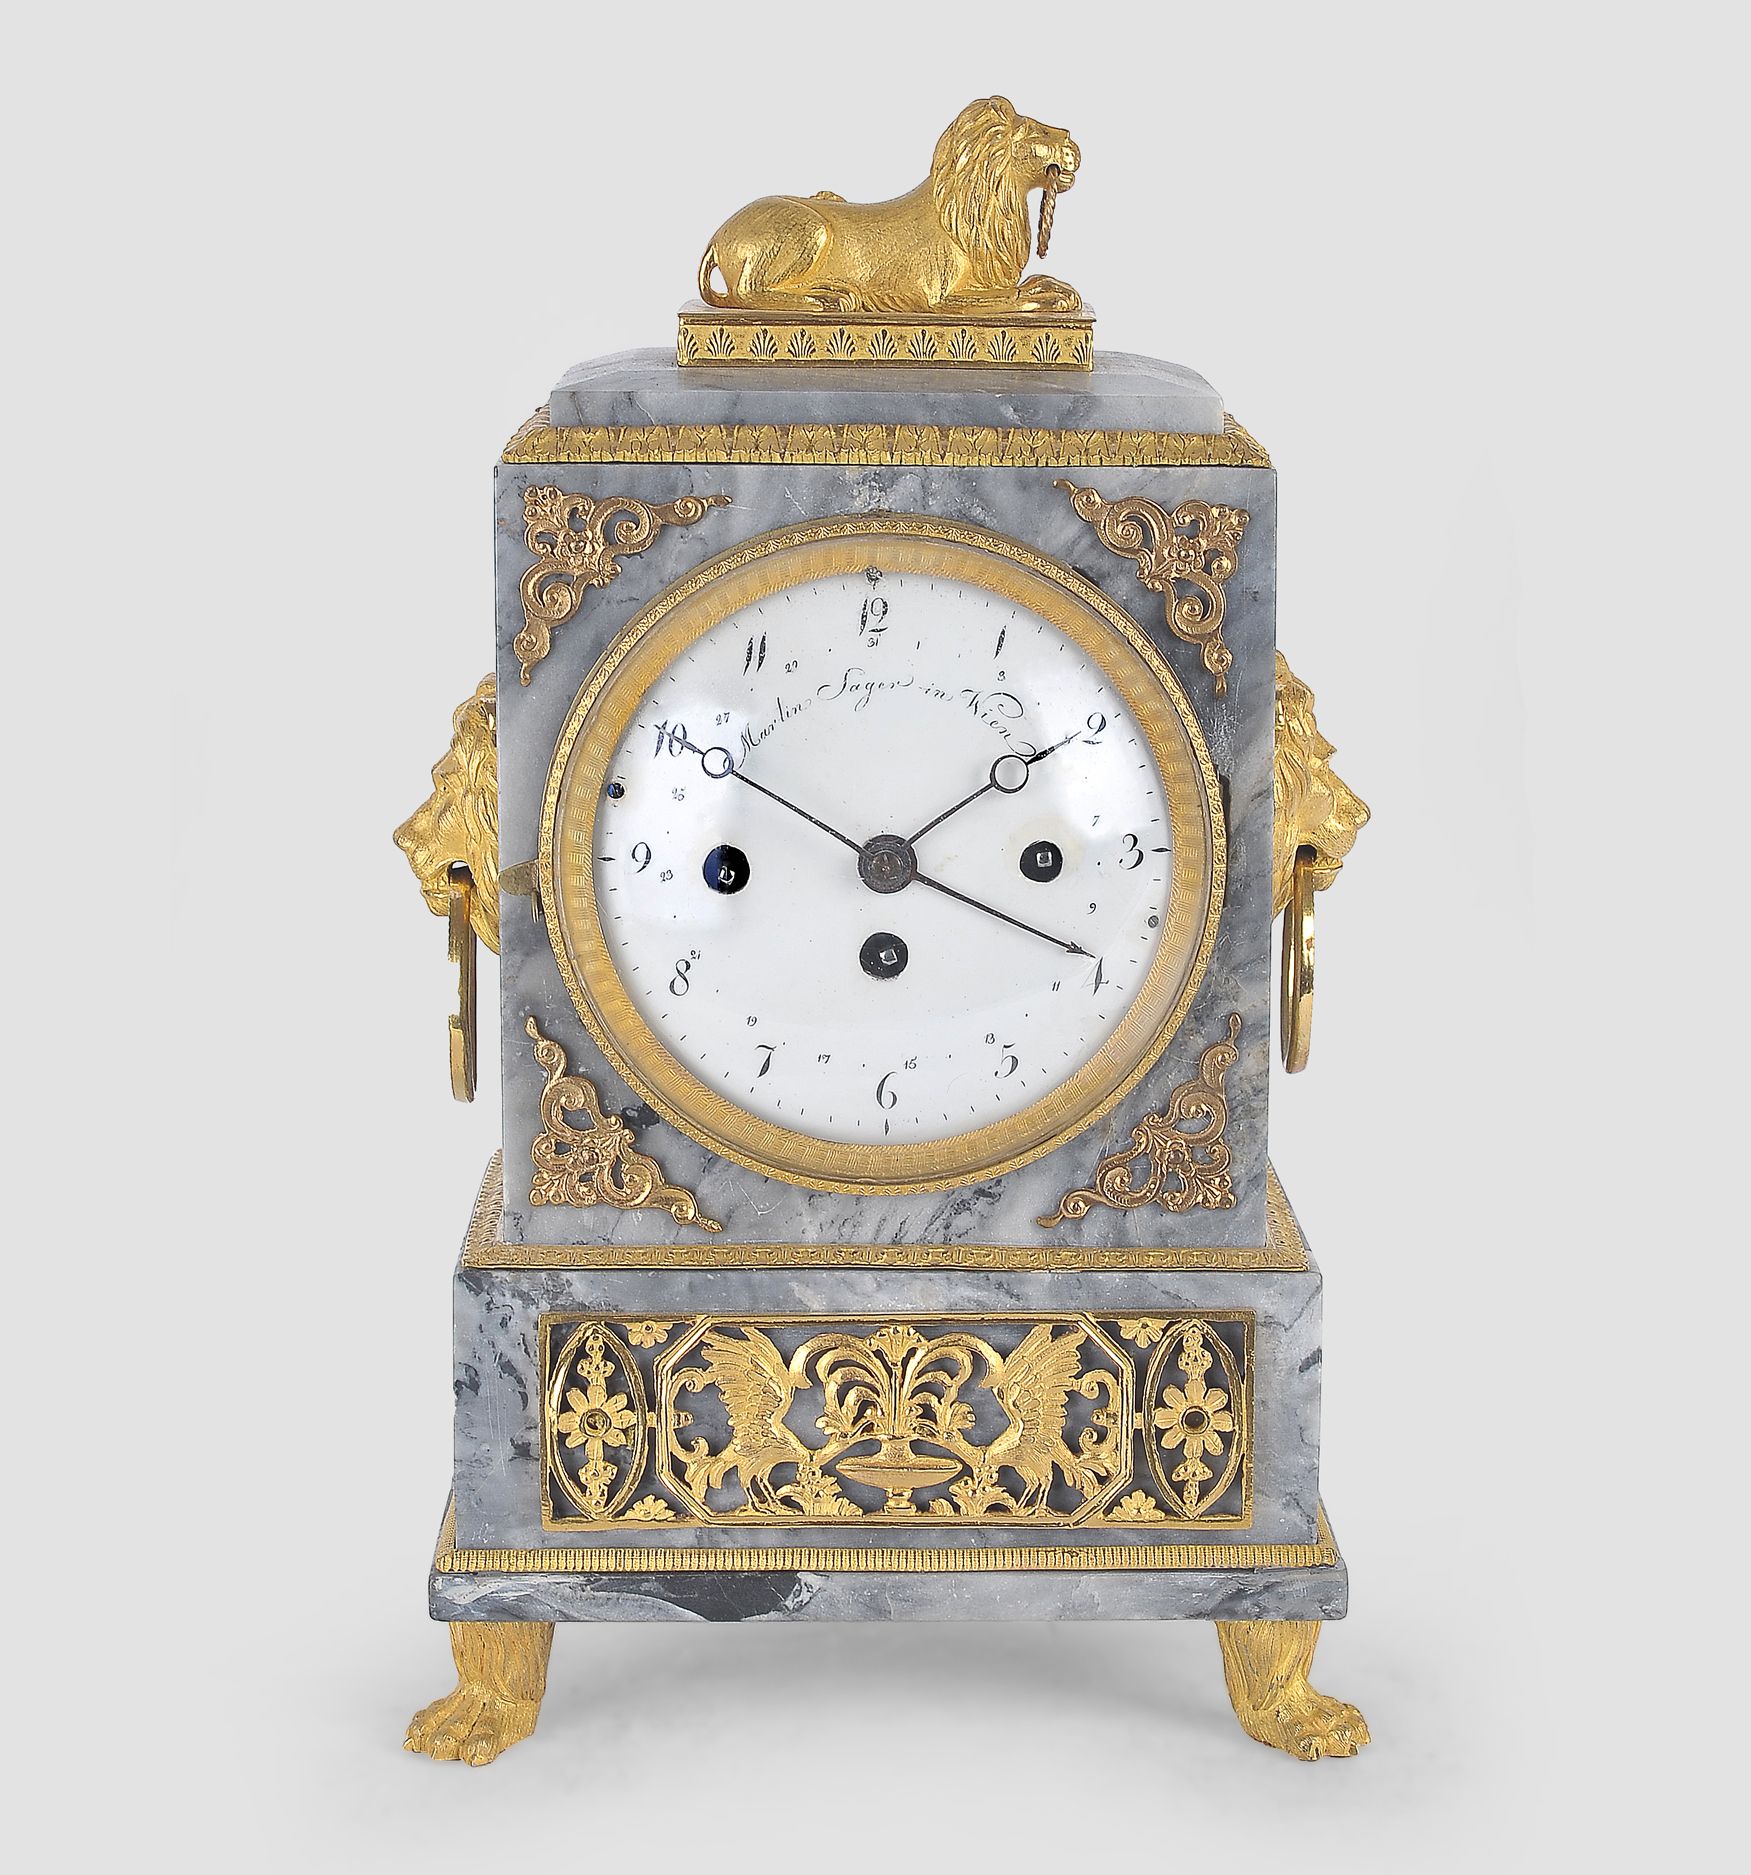 Null Commodeclock


Vienna, ca. 1820/30


Gray marble


Gilt bronze fittings


V&hellip;